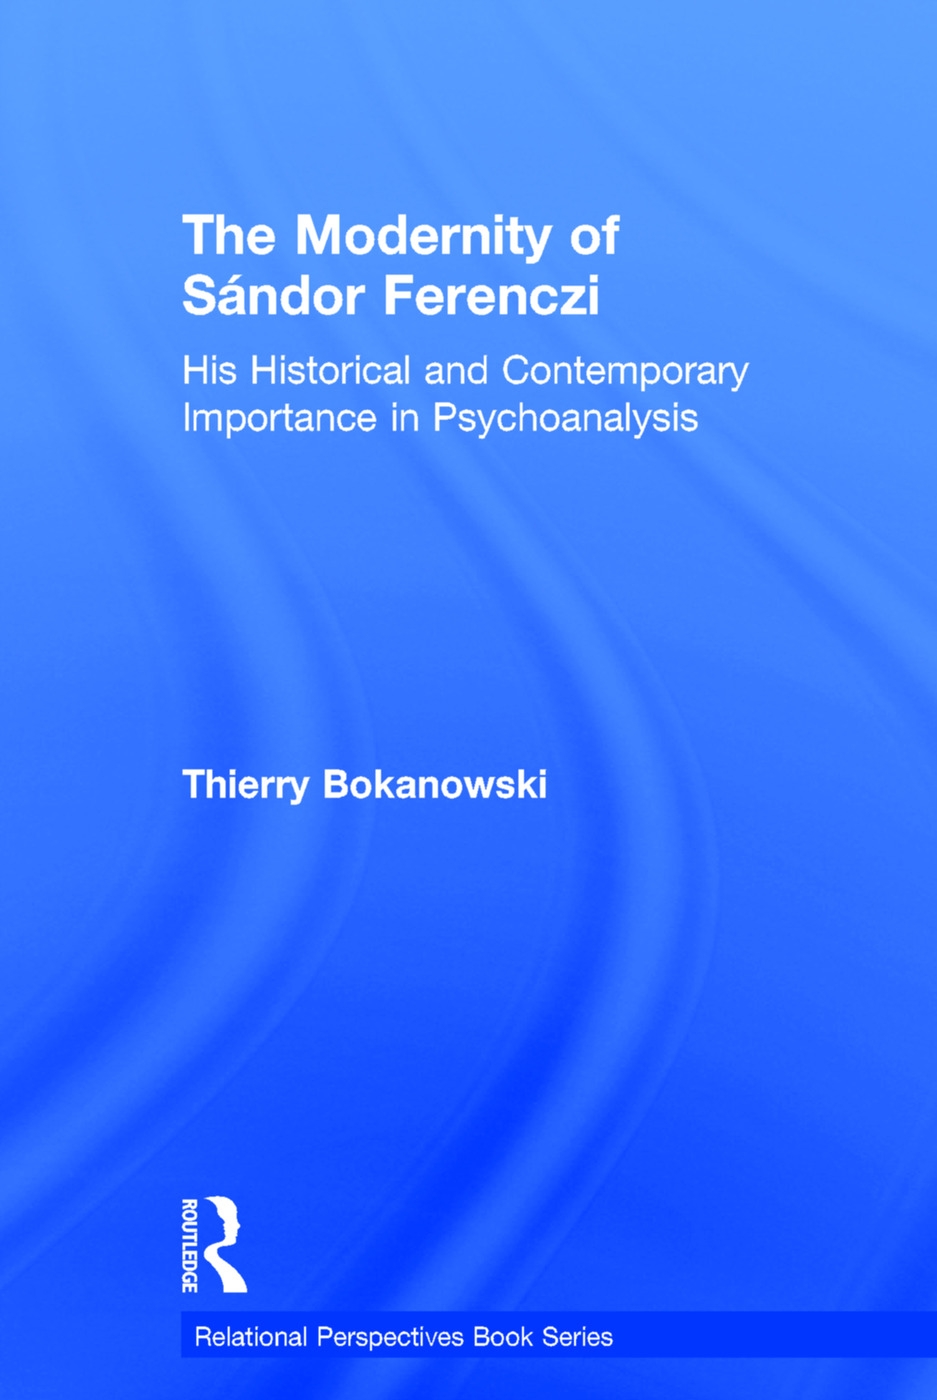 The Modernity of Sándor Ferenczi: His Historical and Contemporary Importance in Psychoanalysis